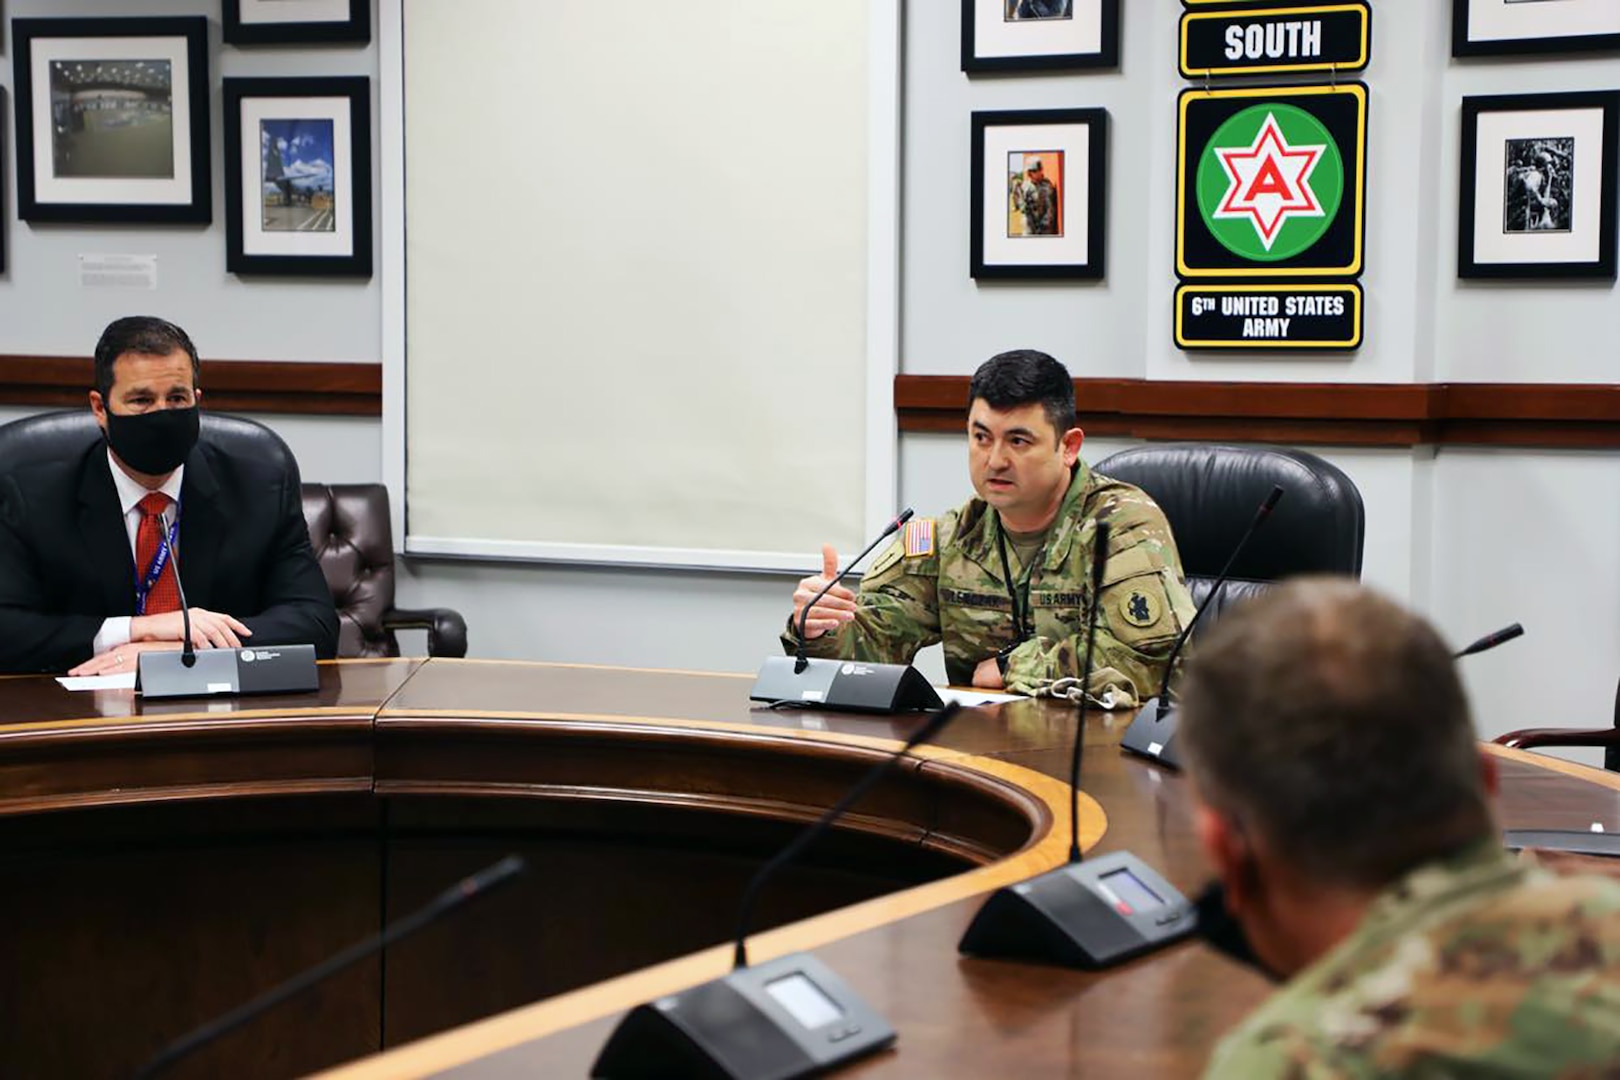 U.S. Army Col. Michael Lewczak (center), U.S. Army South assistant chief of staff for strategy, plans and policy, provides the closing remarks of the Operation Alamo Shield pre-deployment training seminar at Joint Base San Antonio-Fort Sam Houston Feb. 25.